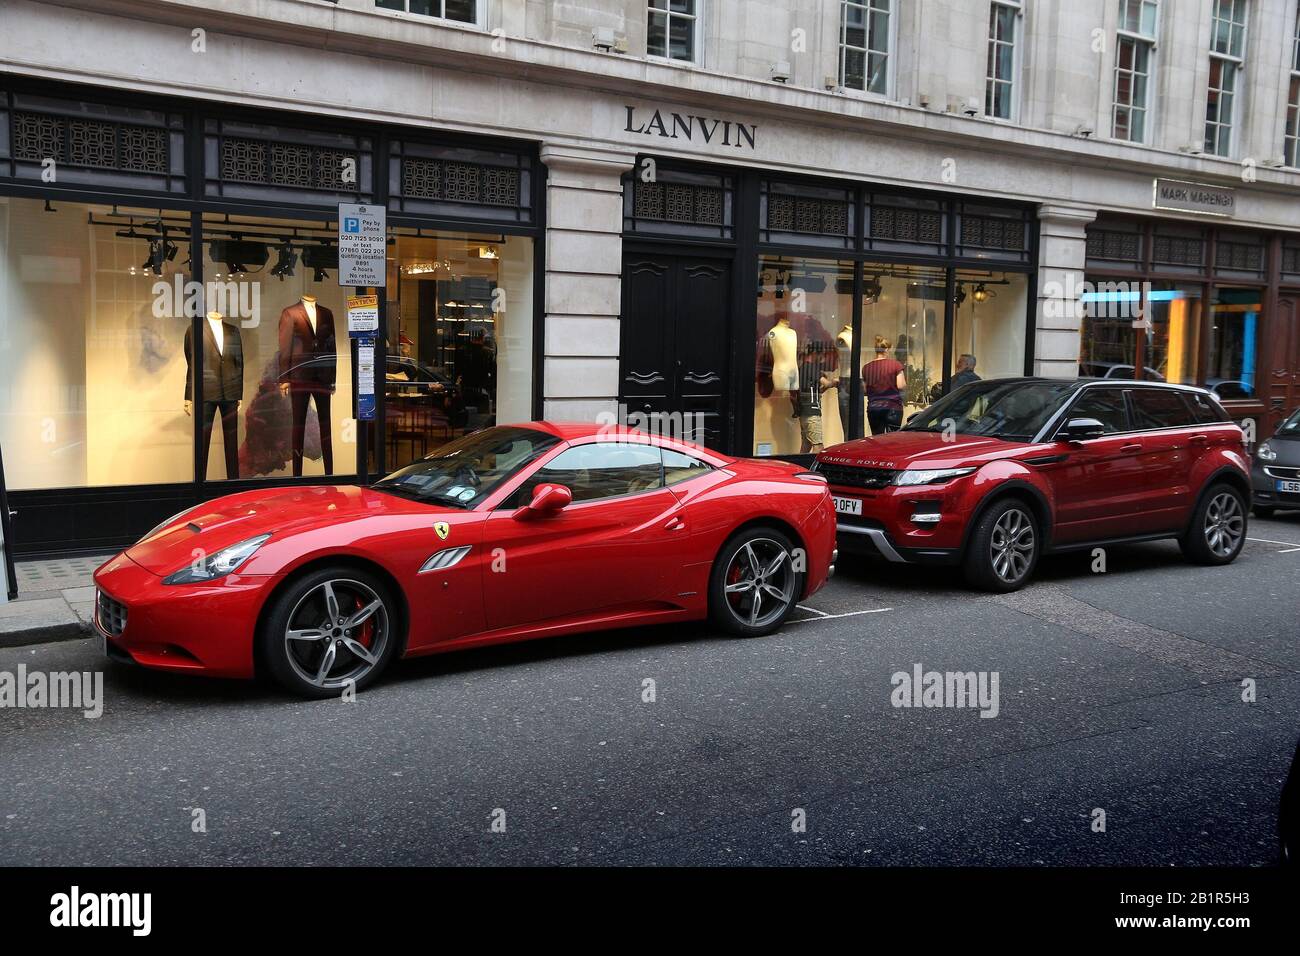 LONDON, UK - JULY 6, 2016: Tailor shops at Savile Row in London. Savile Row is a street in Mayfair, traditionally known for tailors. Stock Photo